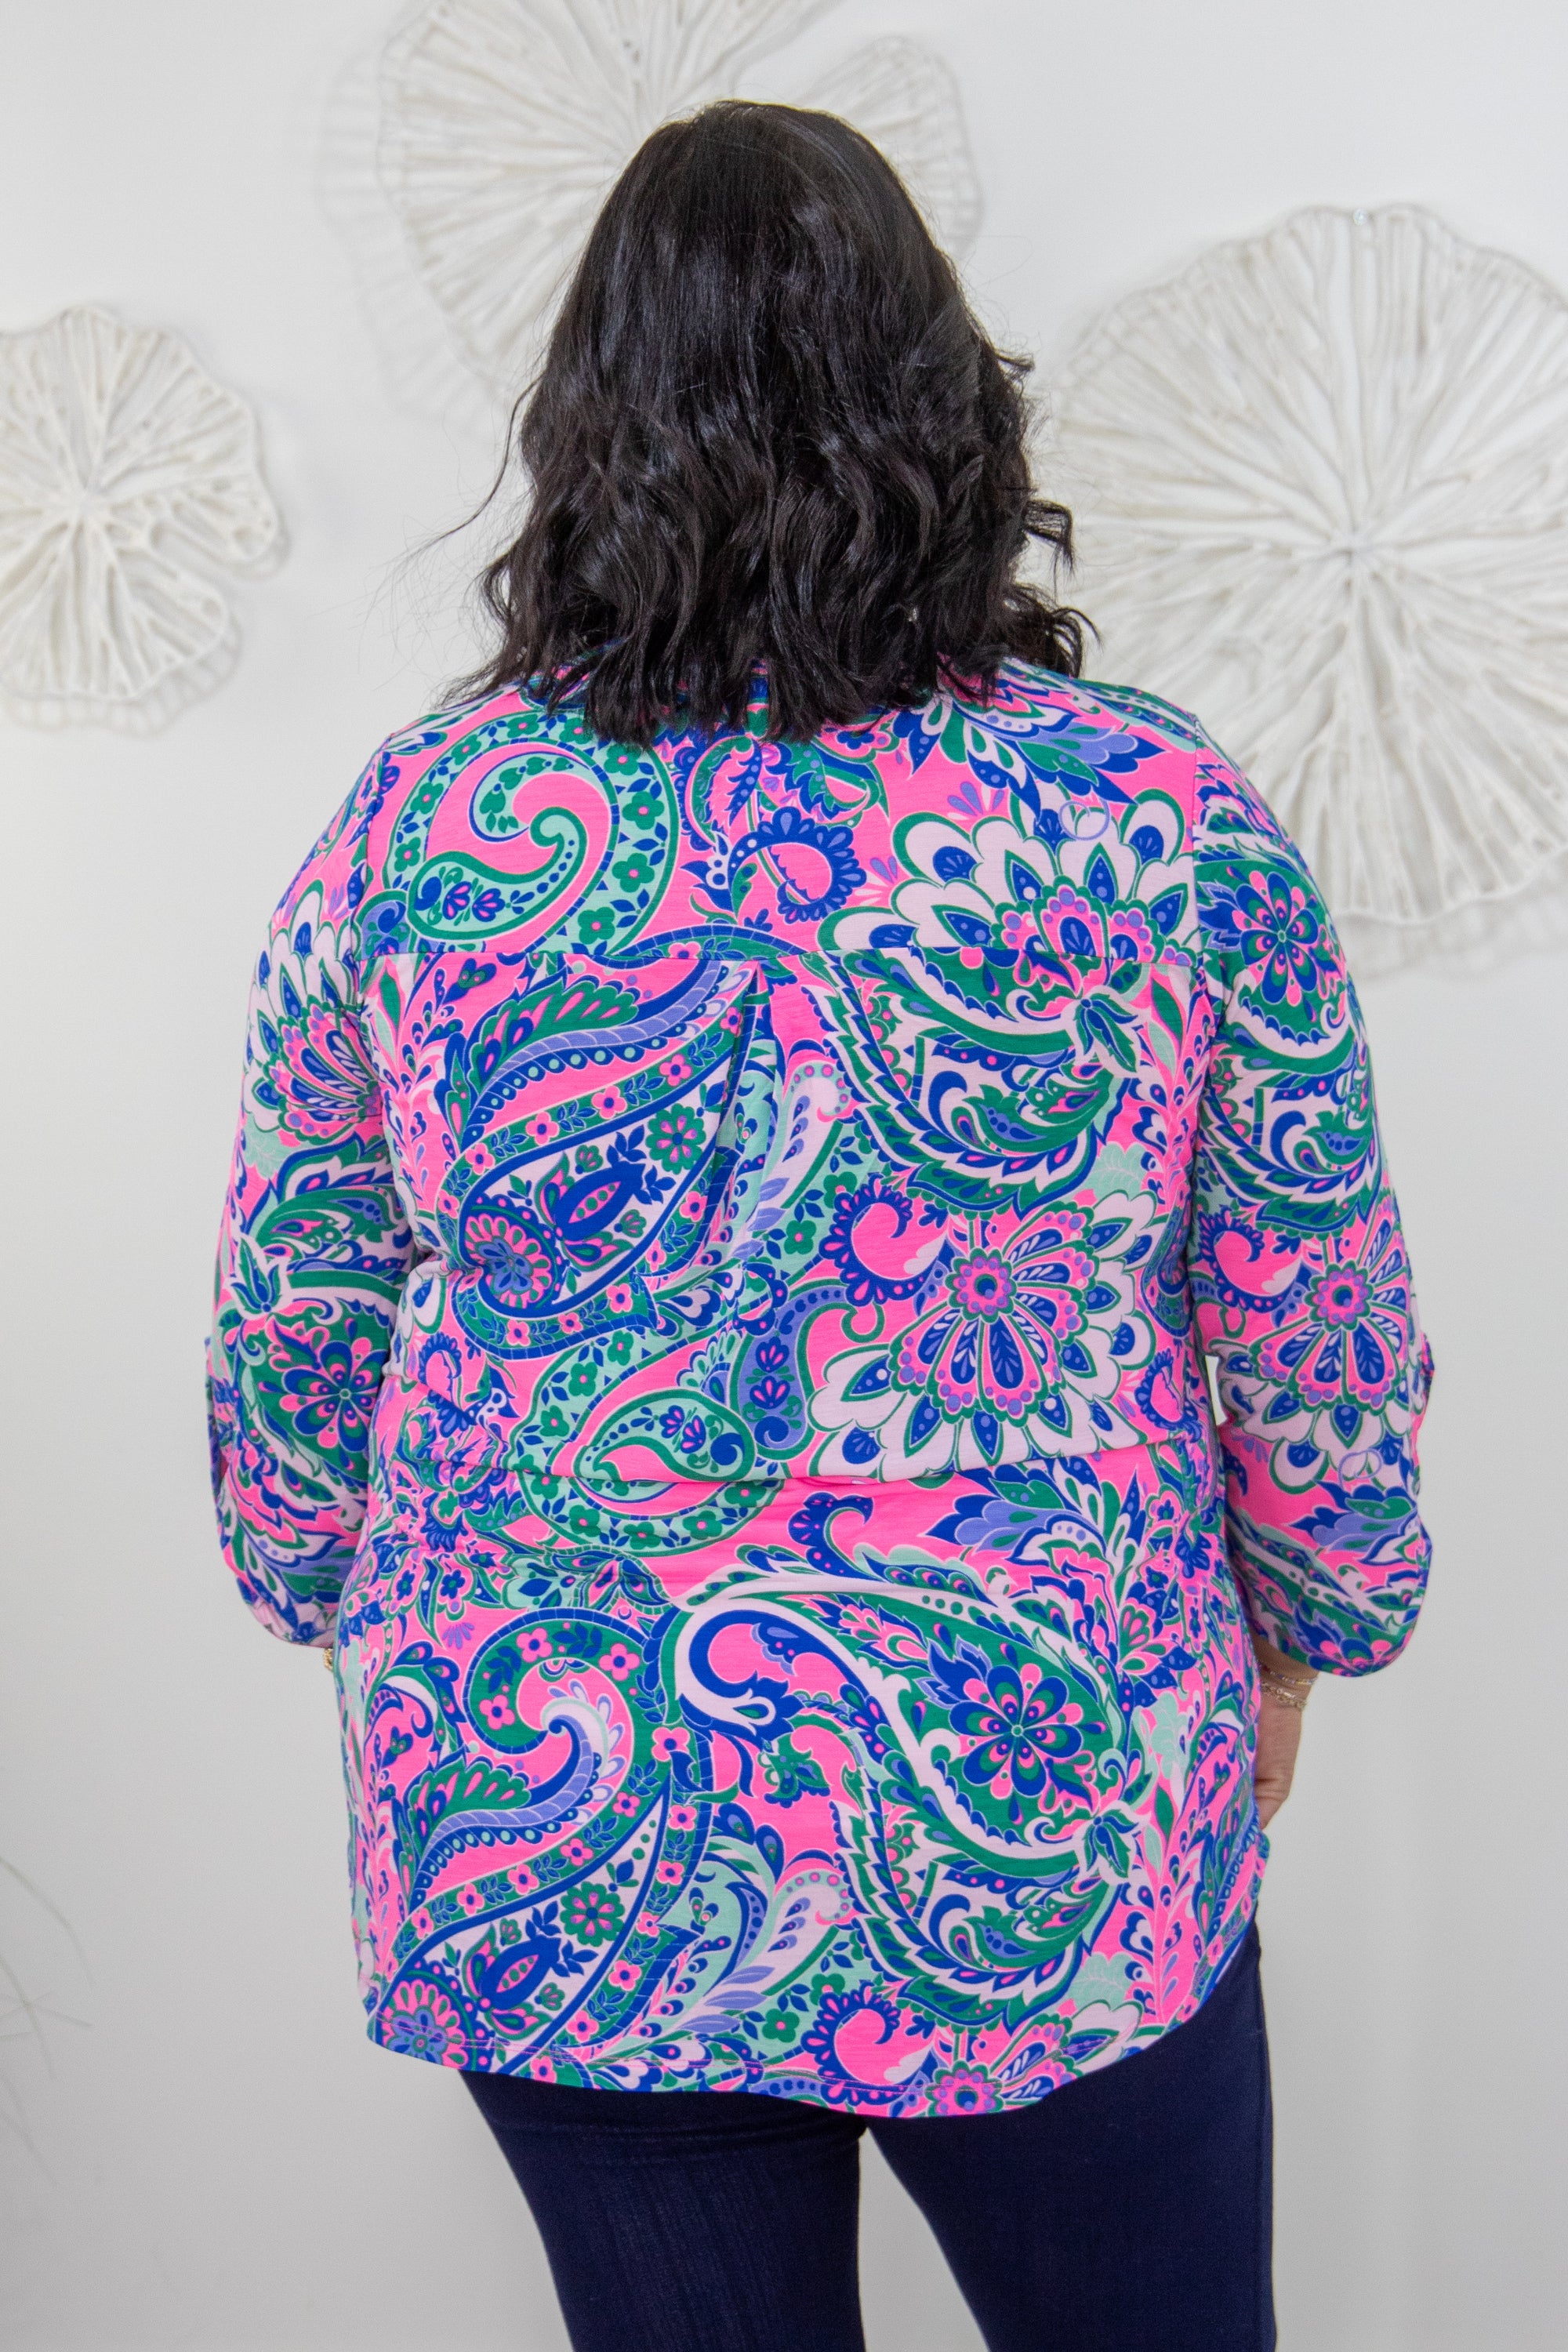 Neon Pink & Green Paisley Lizzy Top